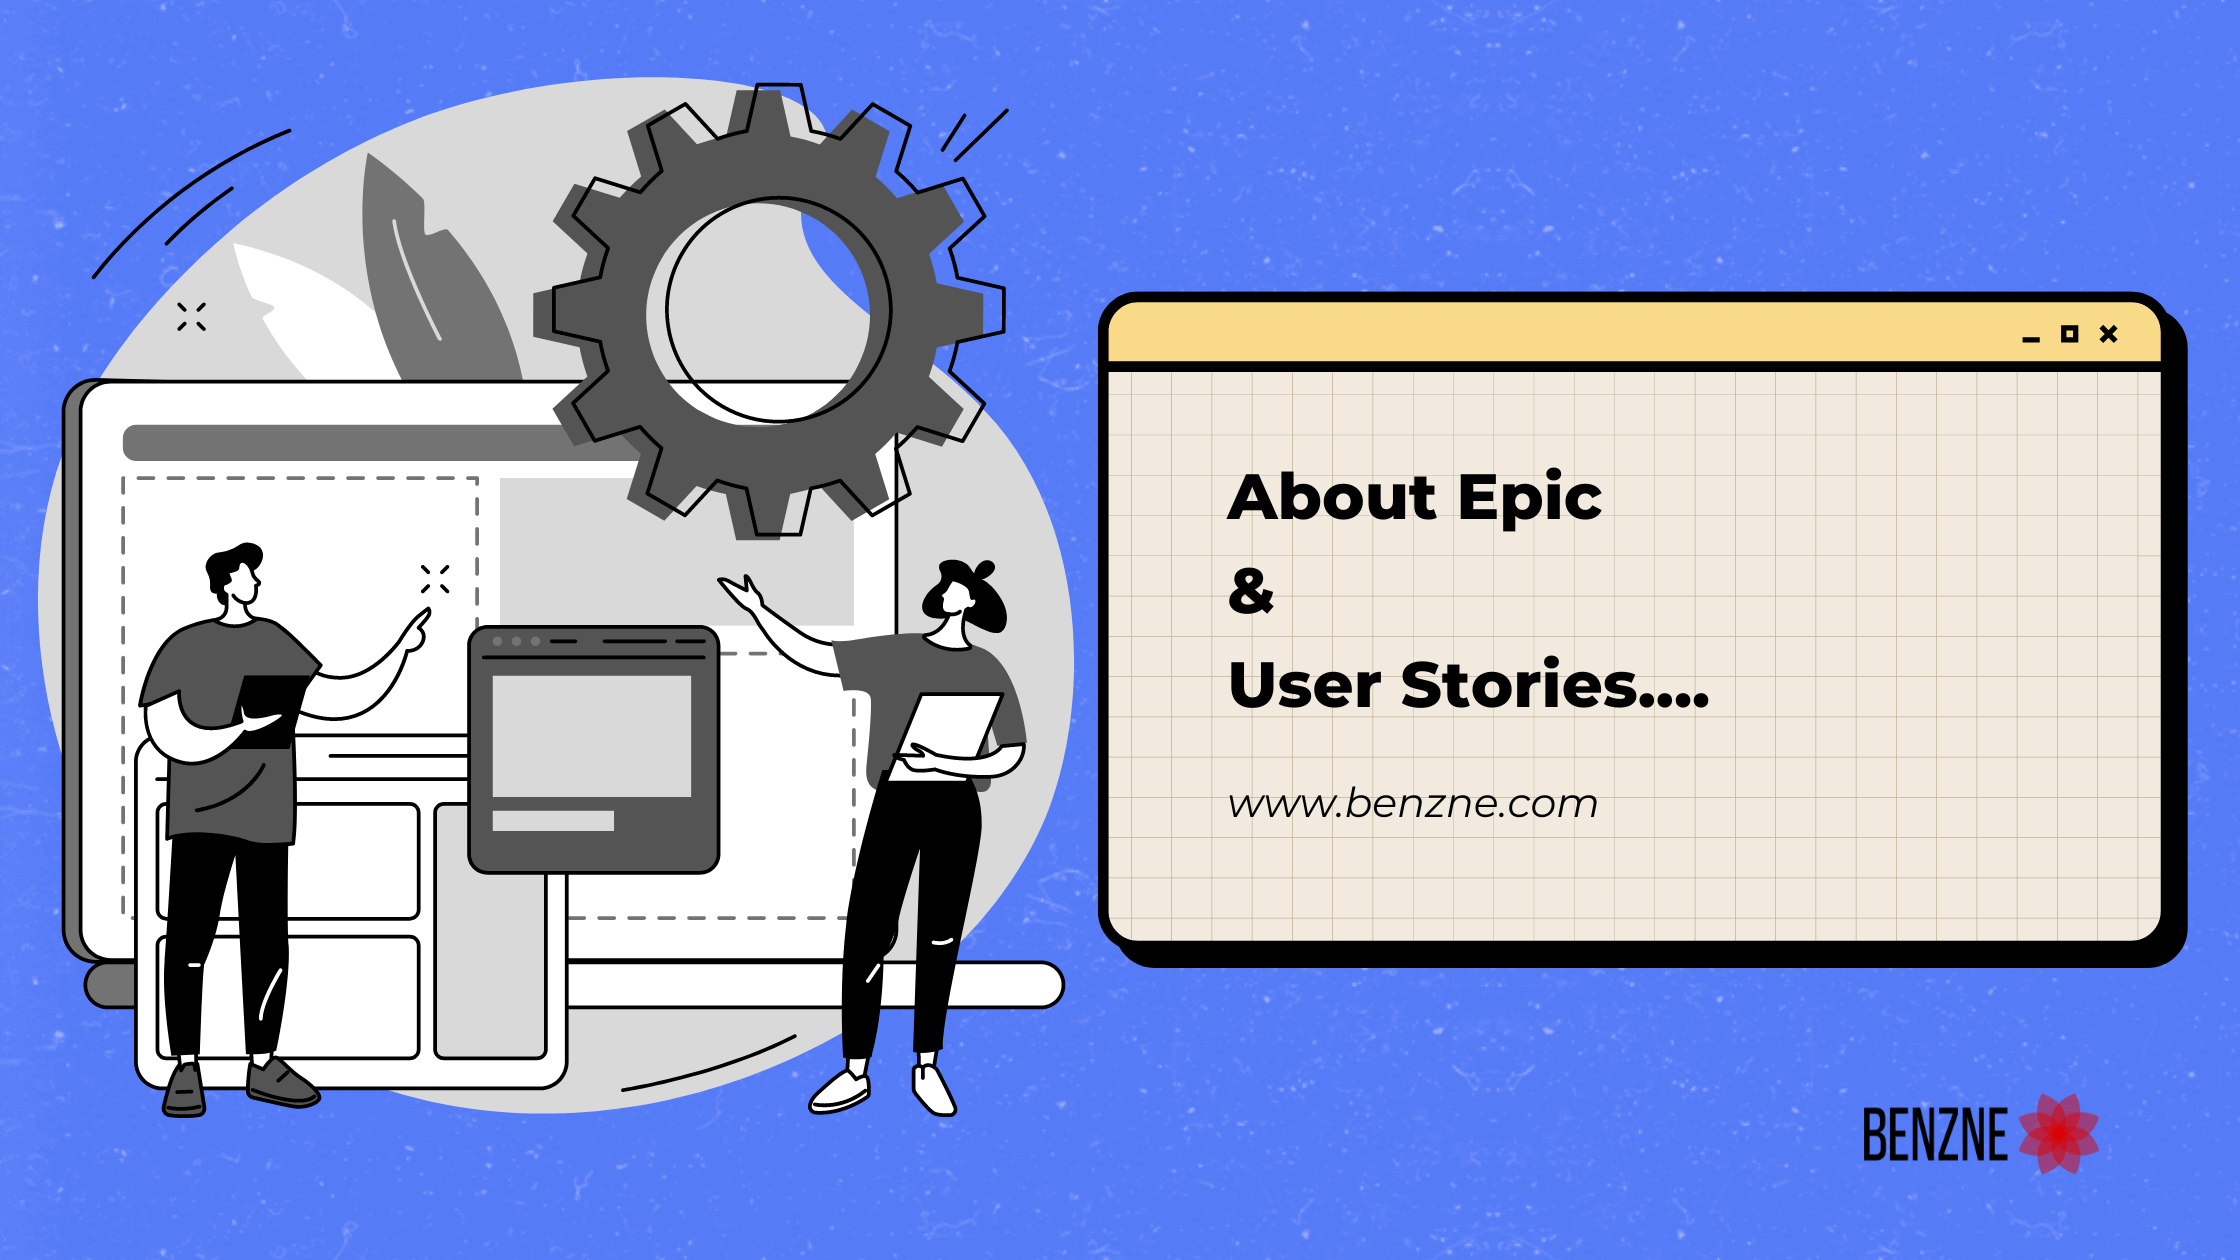 What is epic & user stories